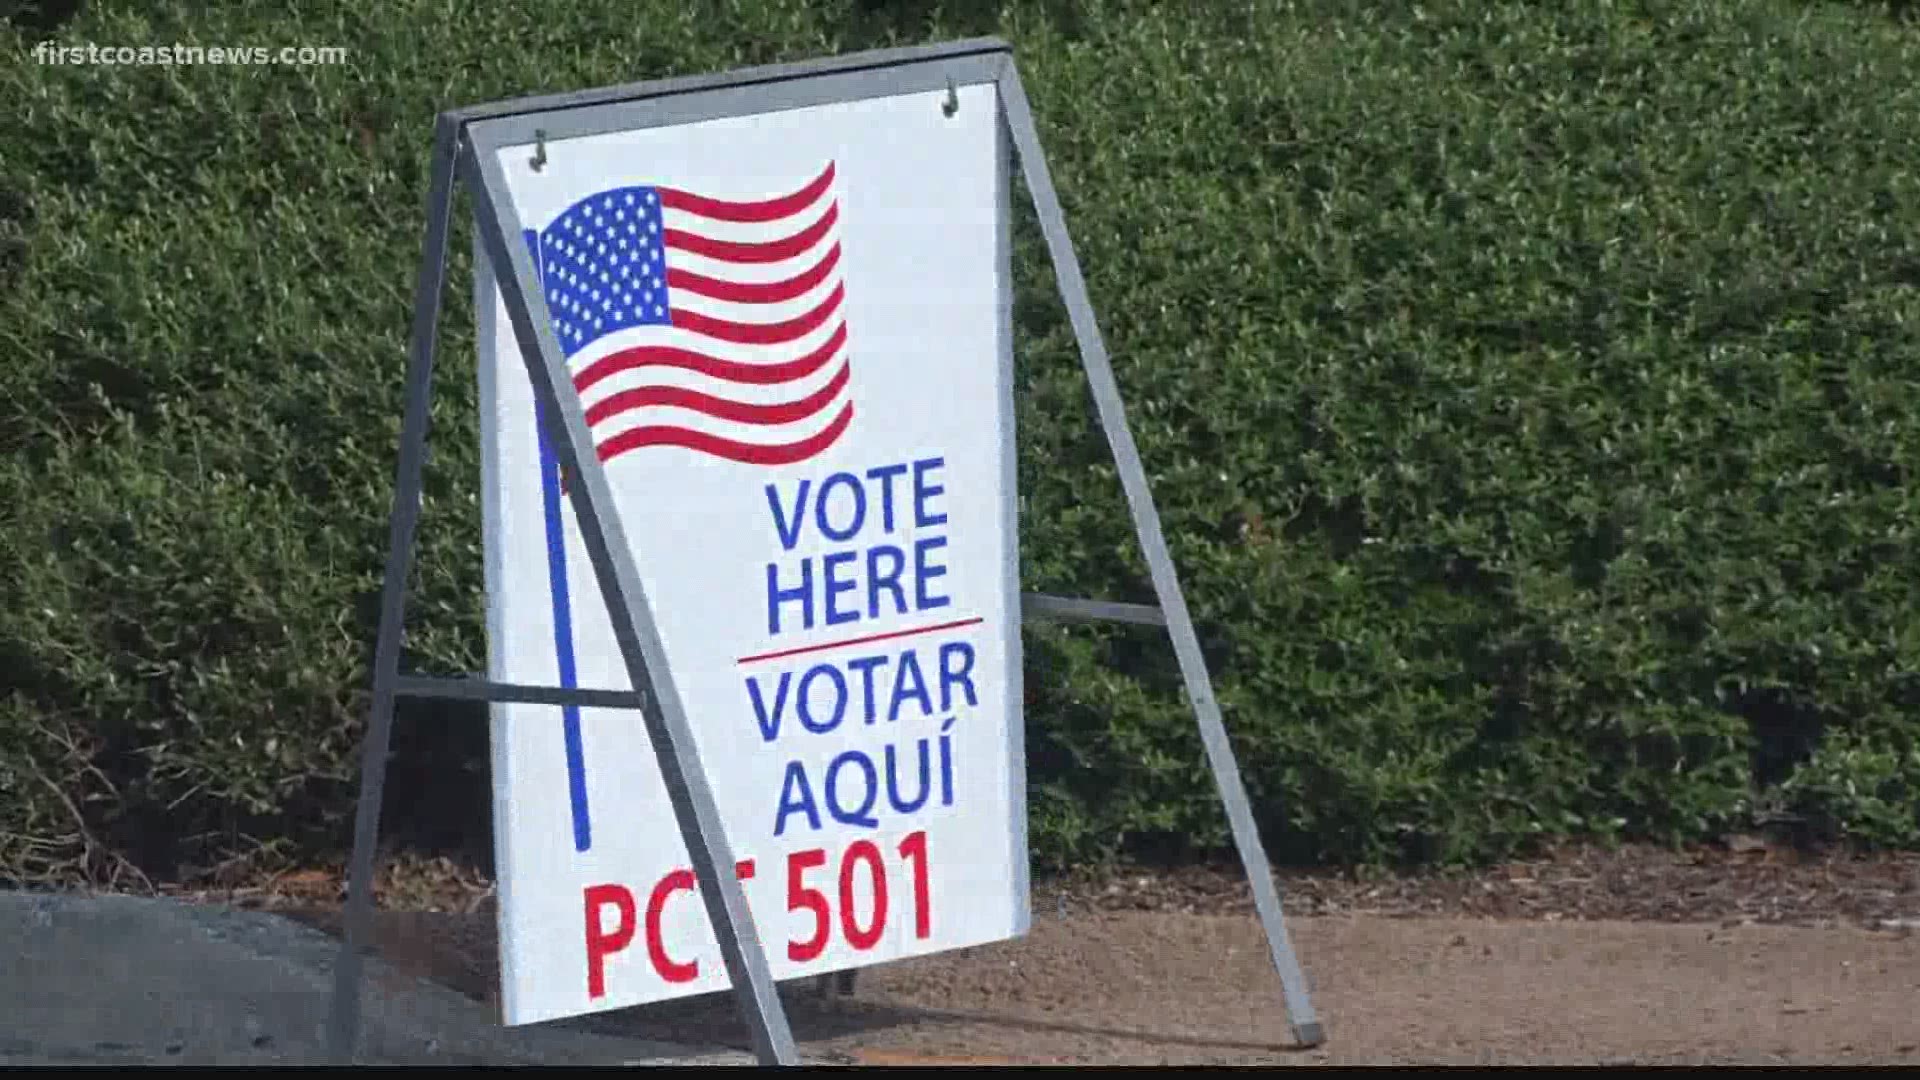 Local officials are asking voters to make sure their voter registration is squared away ahead of Monday, the last day to register to vote in Florida.